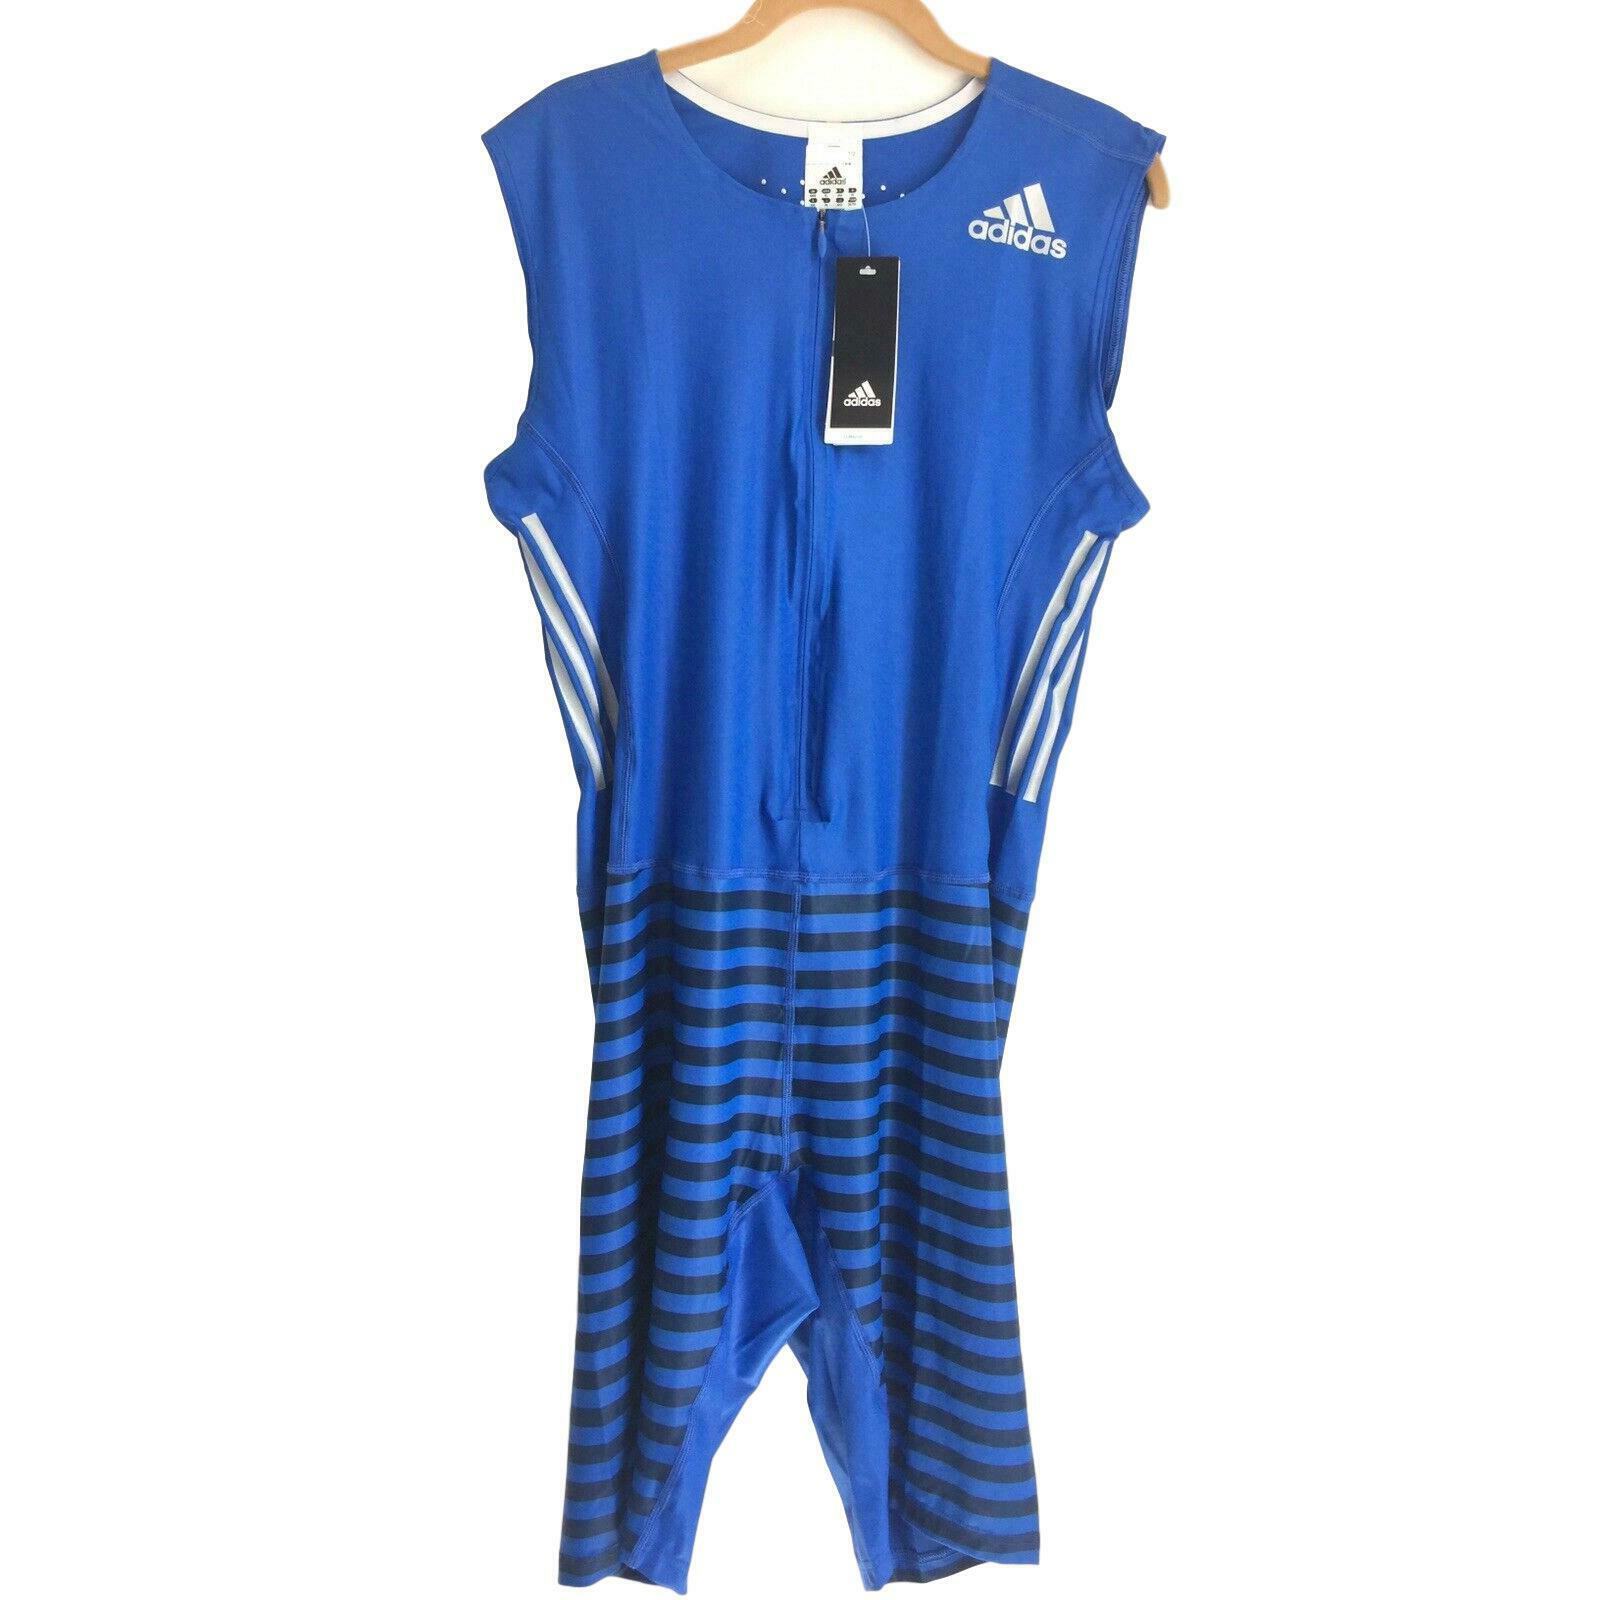 Adidas Climalite Sprint Speed Suit Mens XL Blue Sleeveless Compression S96496